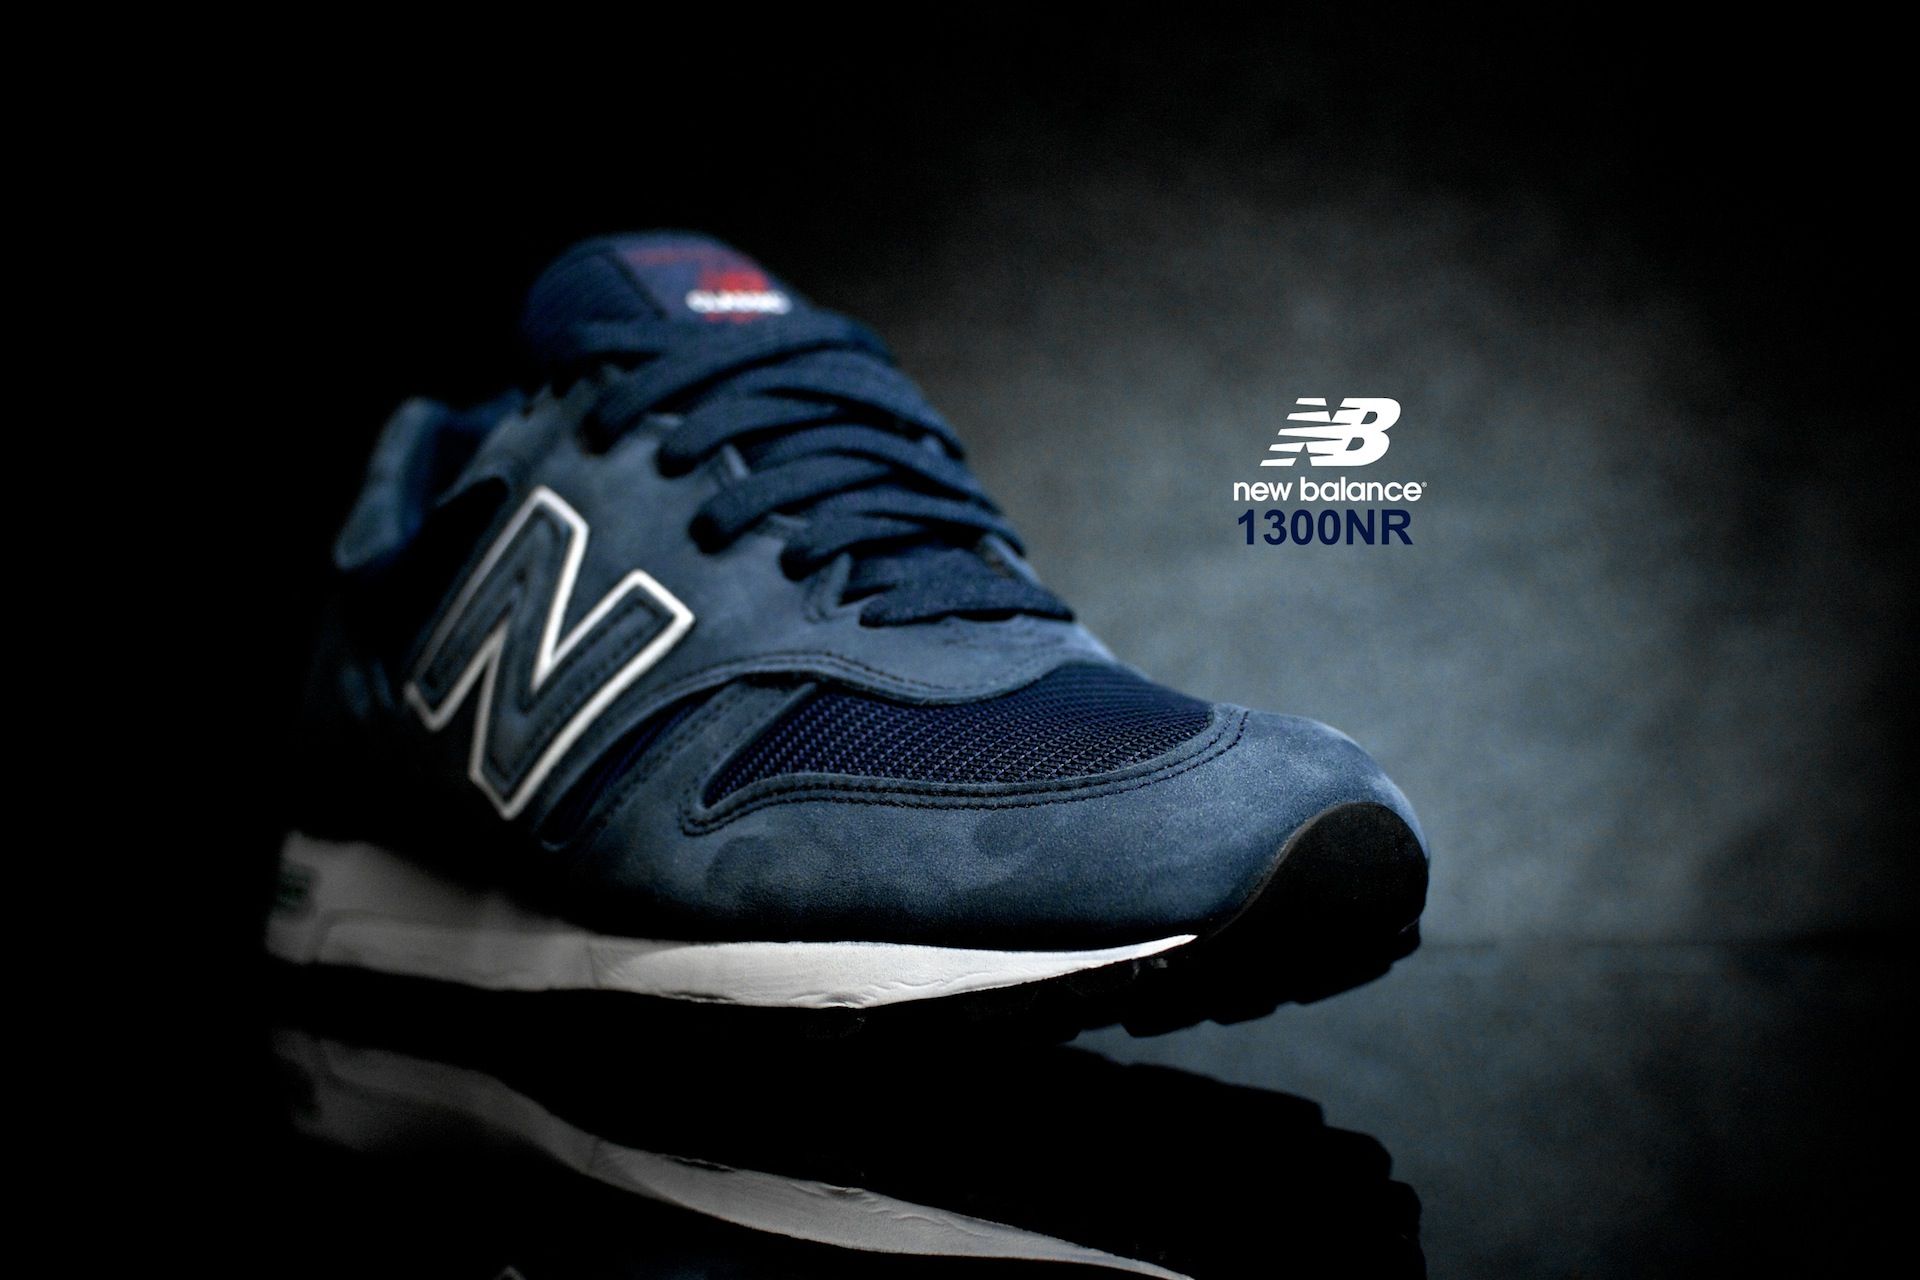 New Balance Quotes Wallpapers